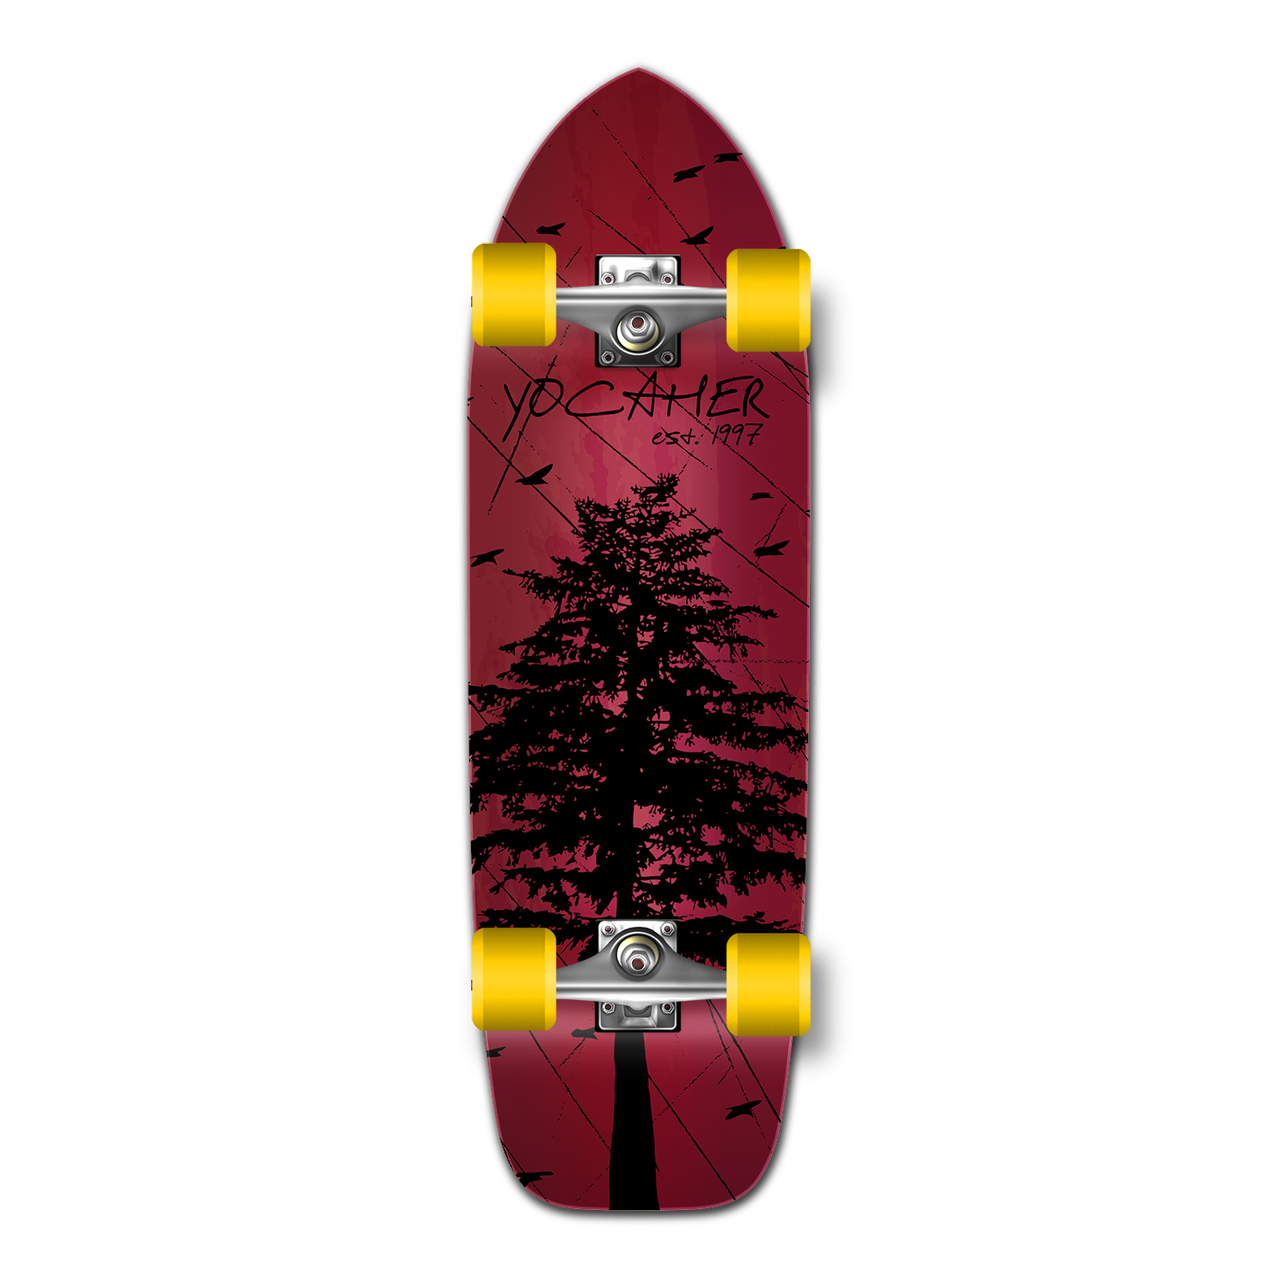 Yocaher Old School Longboard Complete - In the Pines Red